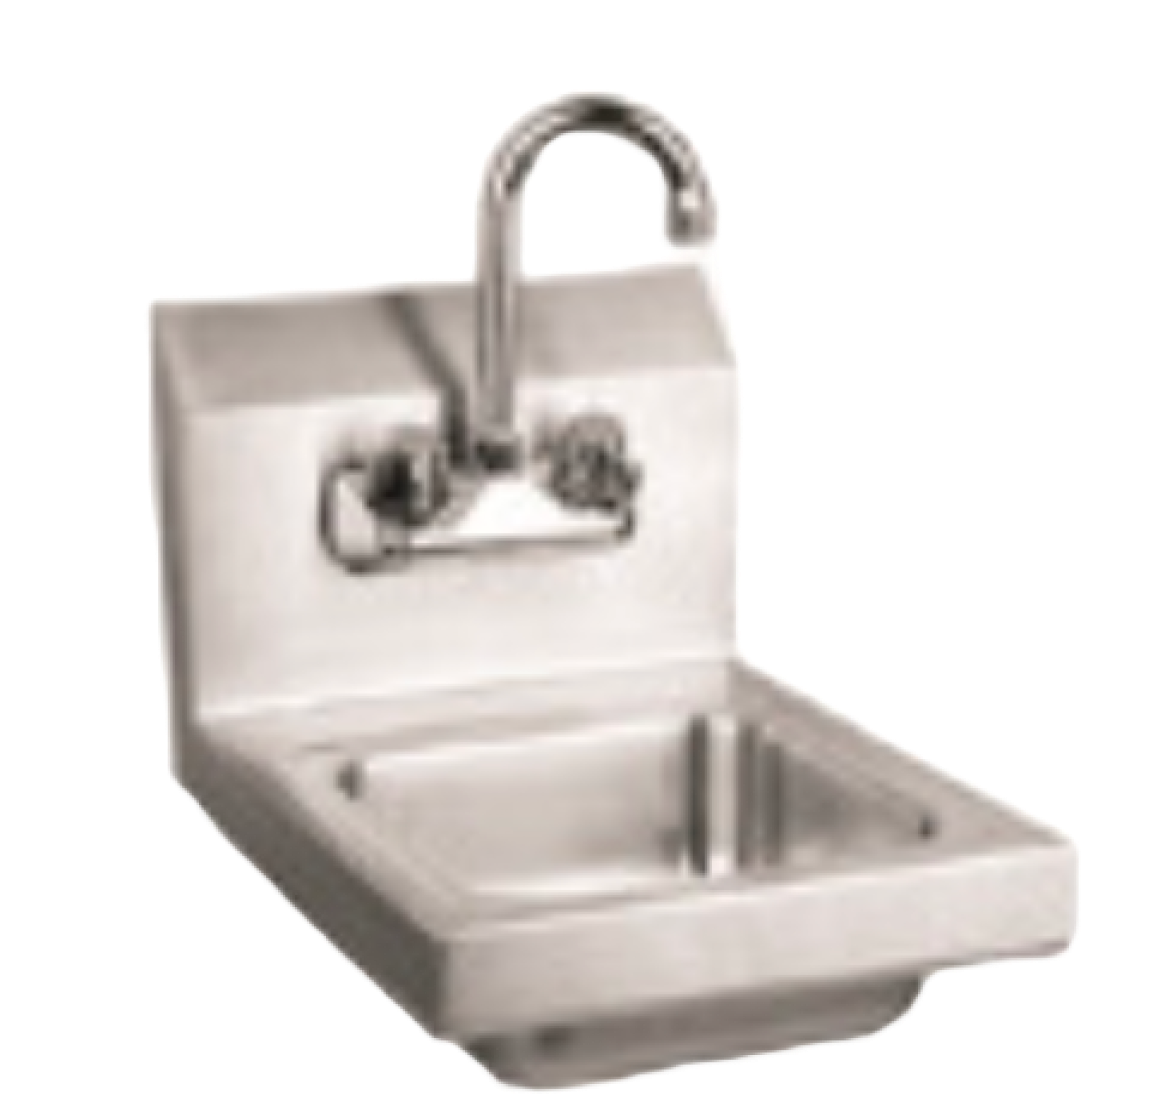 20 Gauge 304S/S Hand Sink, Wall Mounted Clip Included, 4" Gooseneck Faucet And 1.5" Drain Basket Included